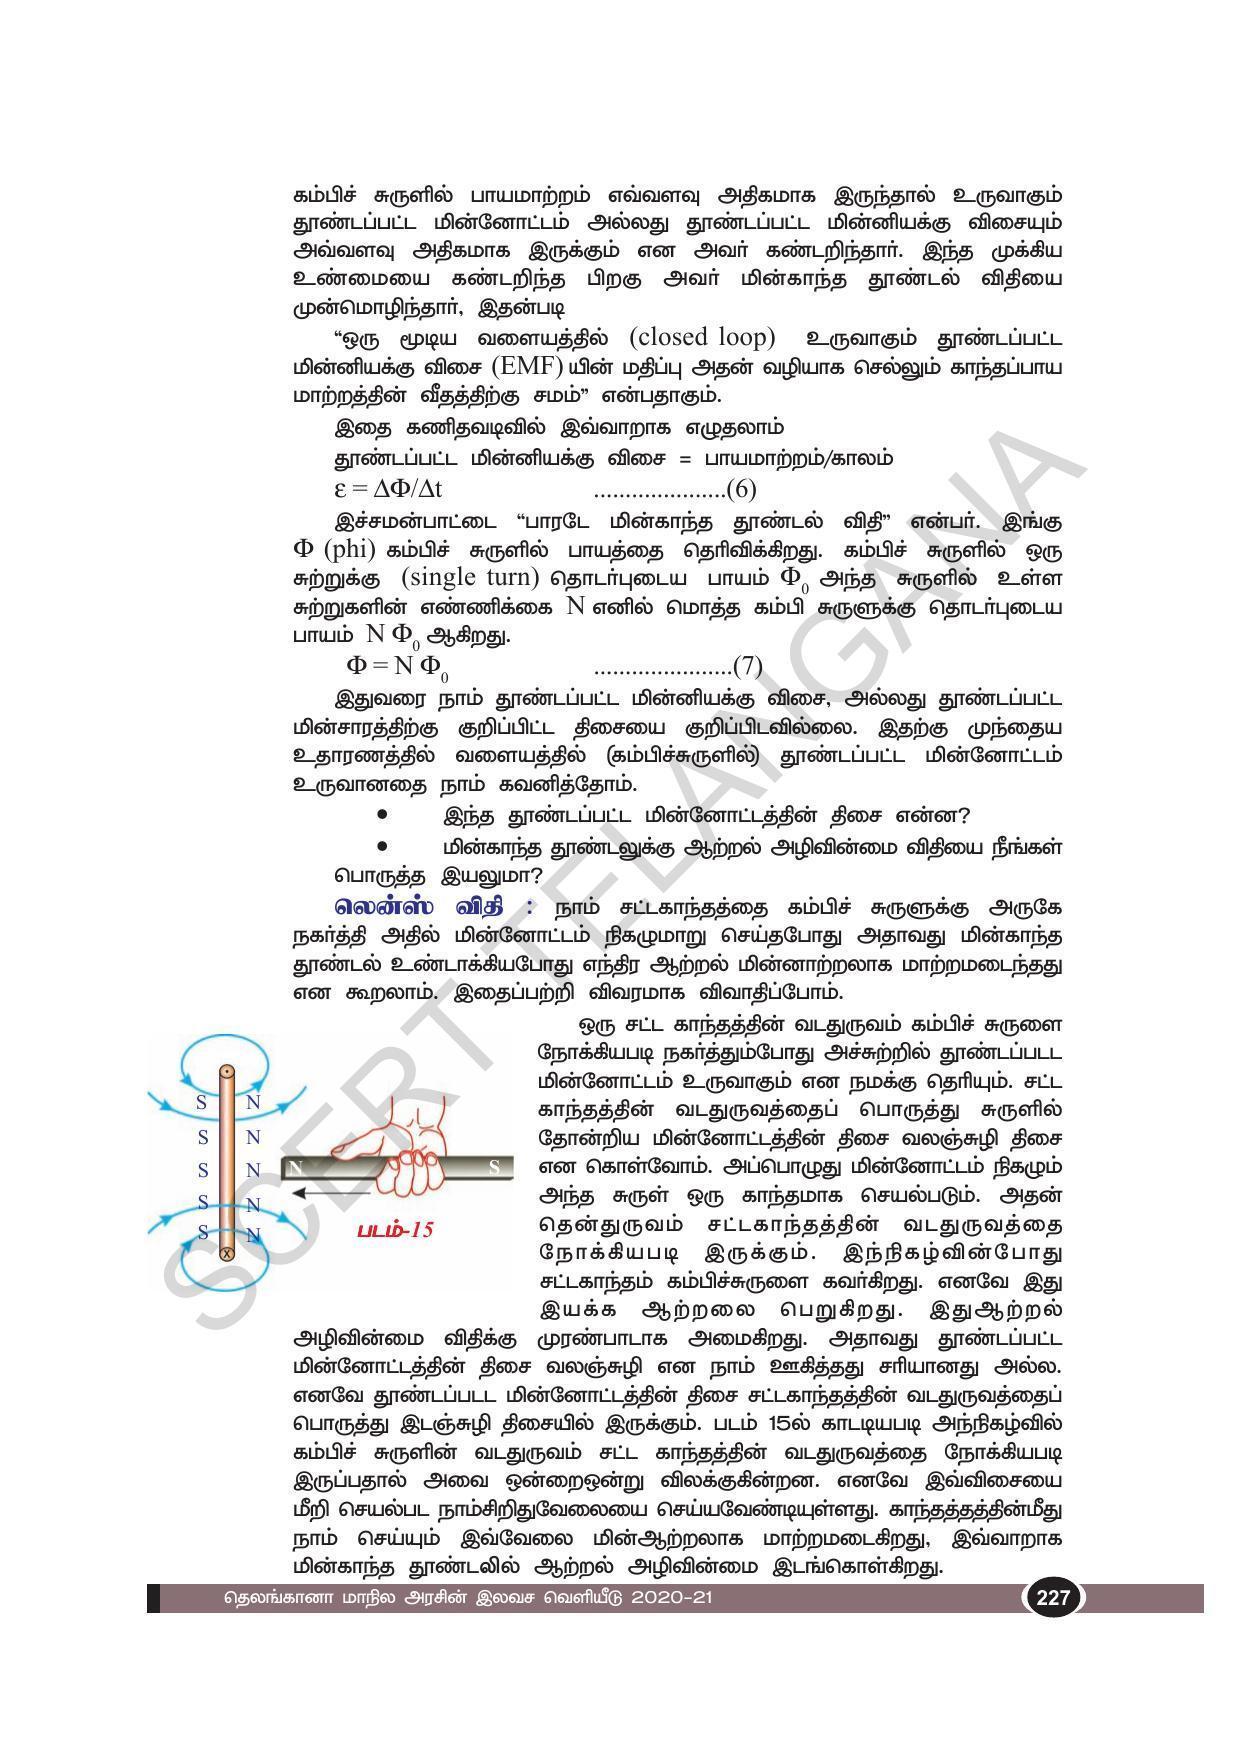 TS SCERT Class 10 Physical Science(Tamil Medium) Text Book - Page 239